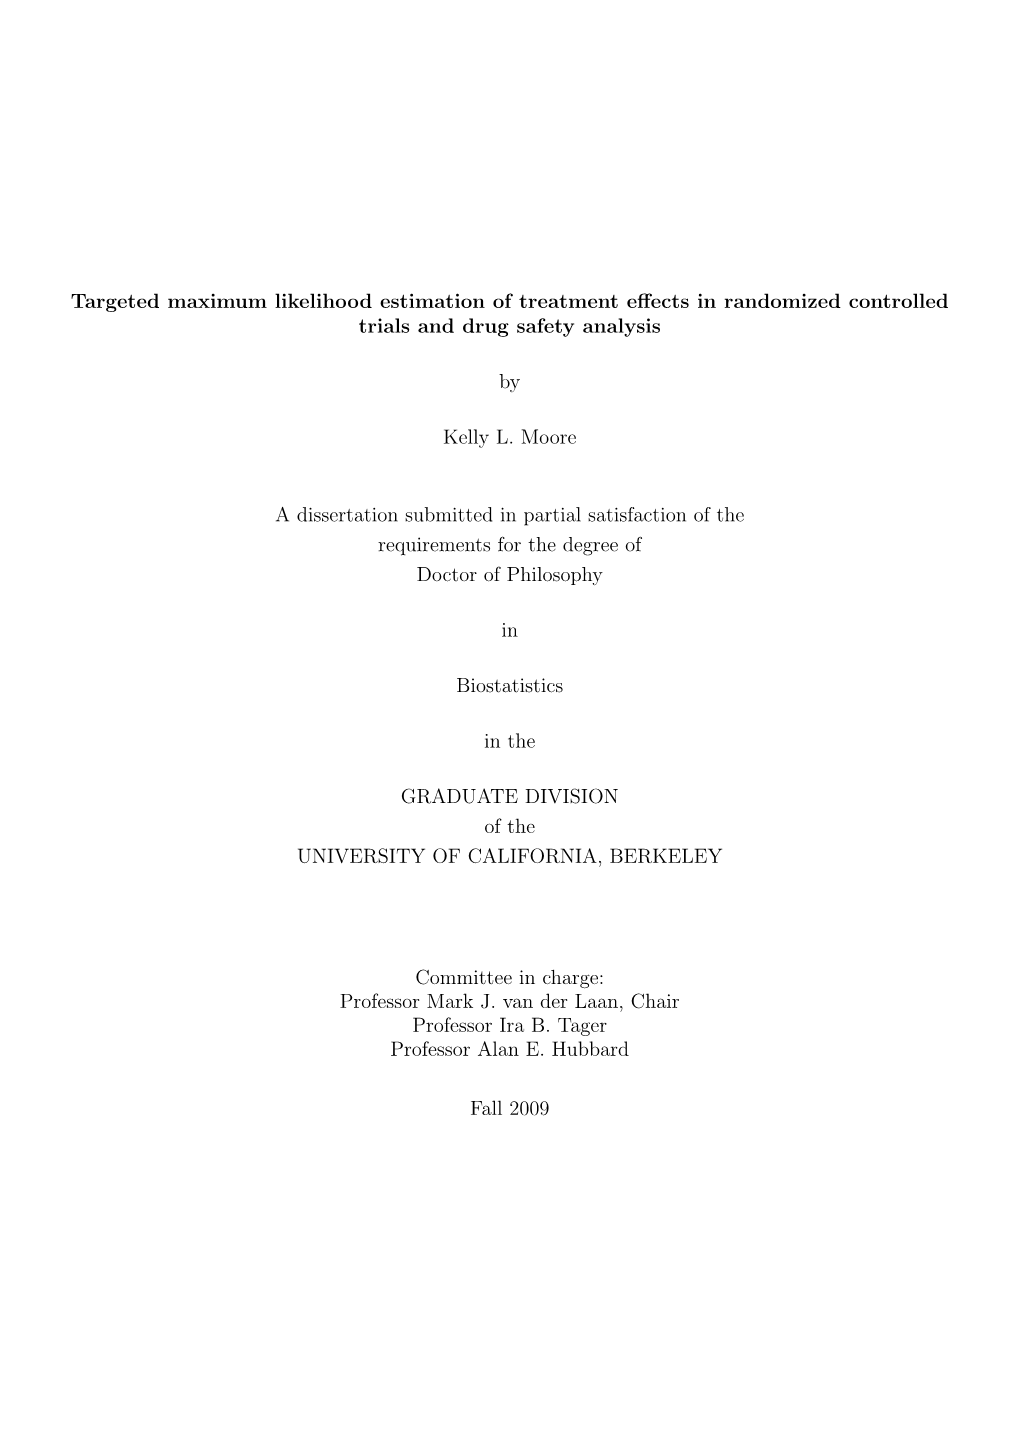 Targeted Maximum Likelihood Estimation of Treatment Effects In